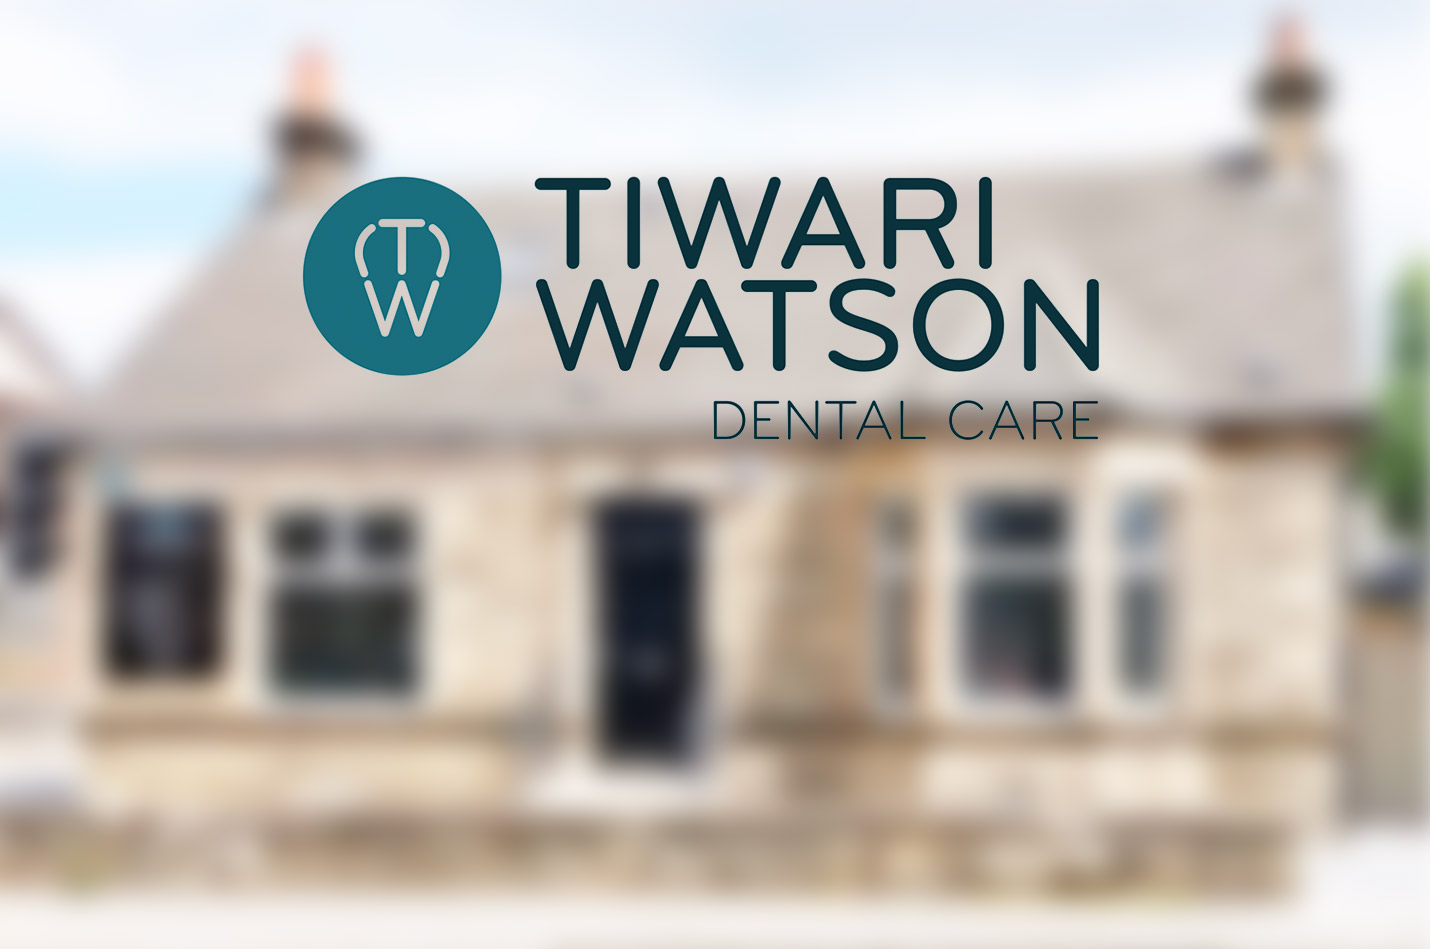 Dedicated to caring family dentistry